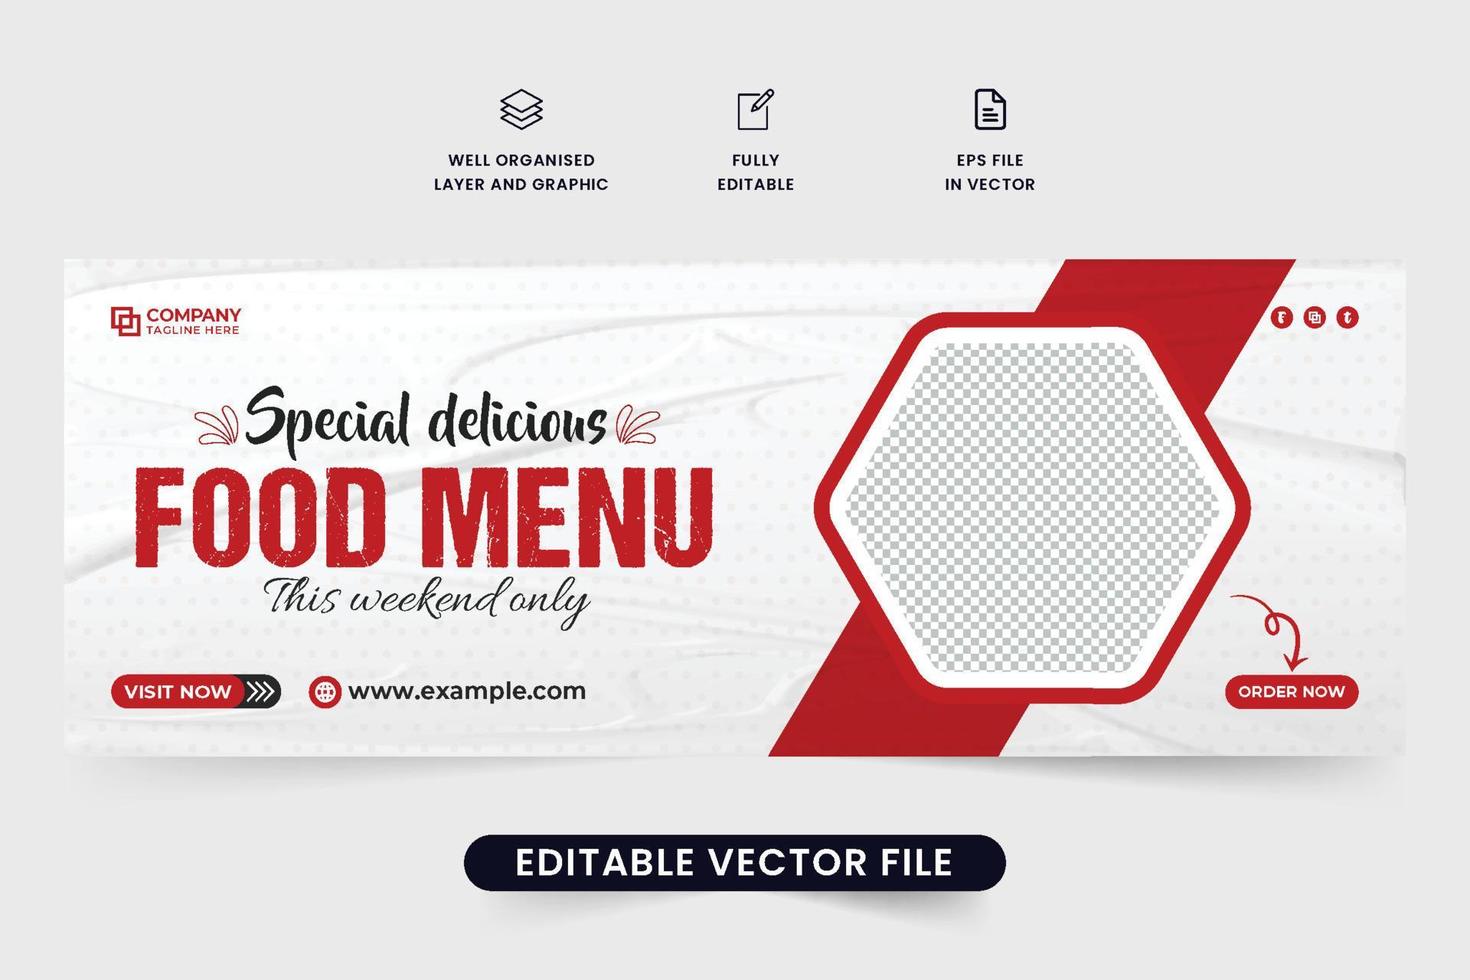 Food menu weekend offer, a social media cover design with red and dark colors. Restaurant business web banner vector for social media promotion. Special food menu commercial web banner vector.